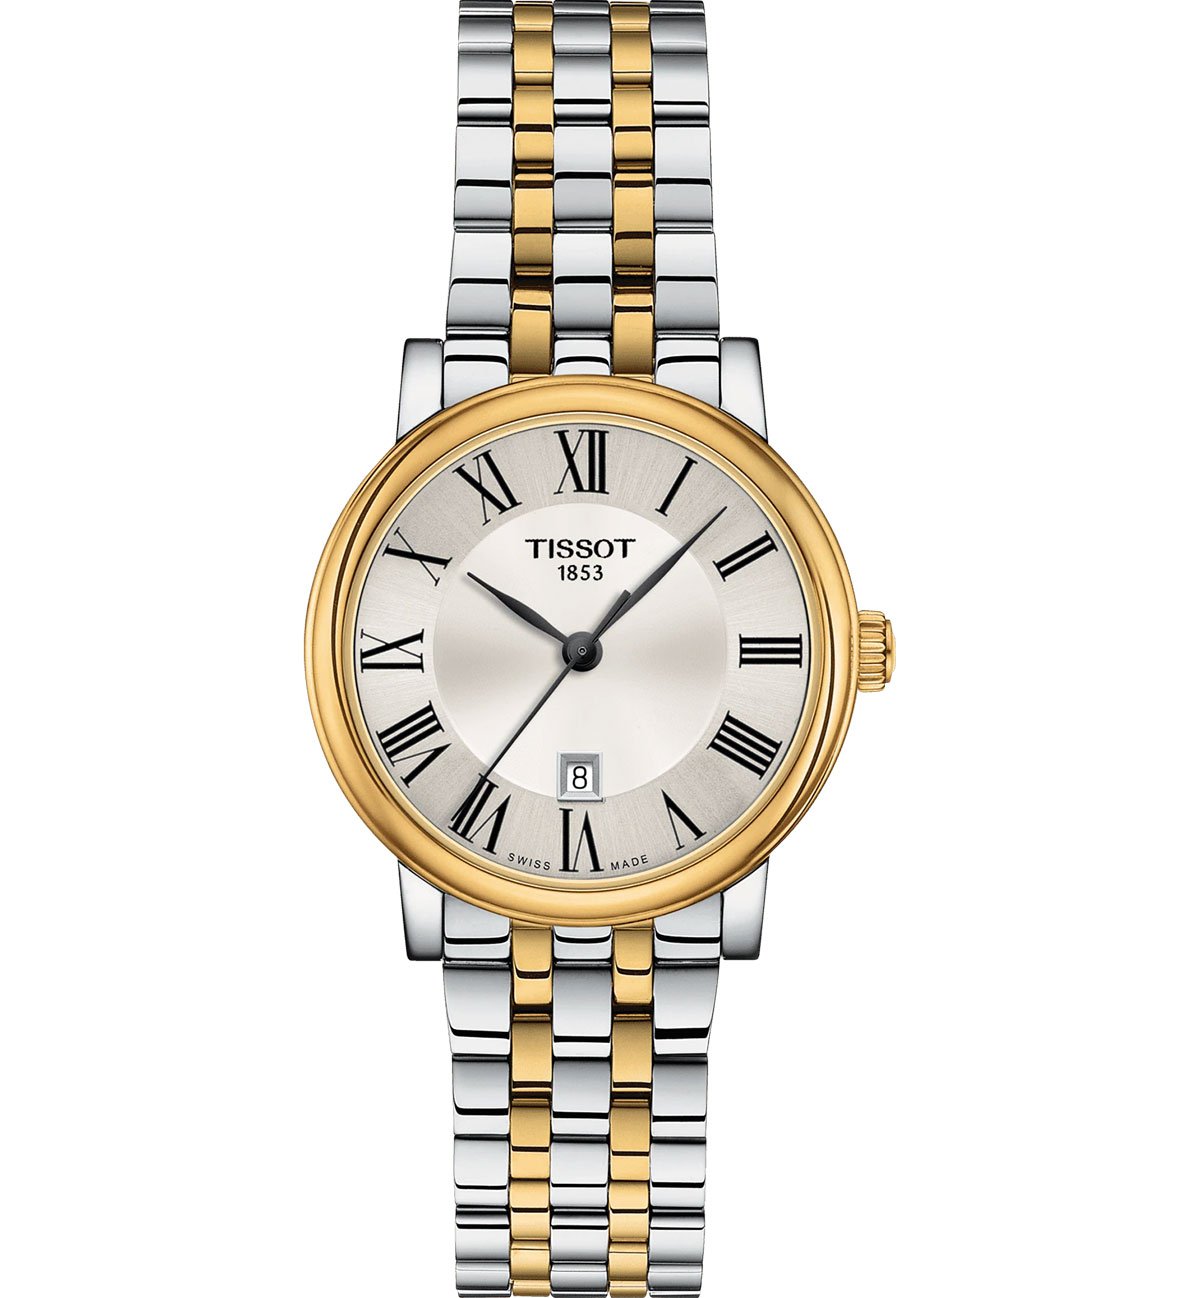 Stainless Steel Quartz Watch Name: Carson Premium
Name Of Bracelet: Two Tone Stainless
Clasp: Deployment
Finish: Polished
Dial Color: Silver